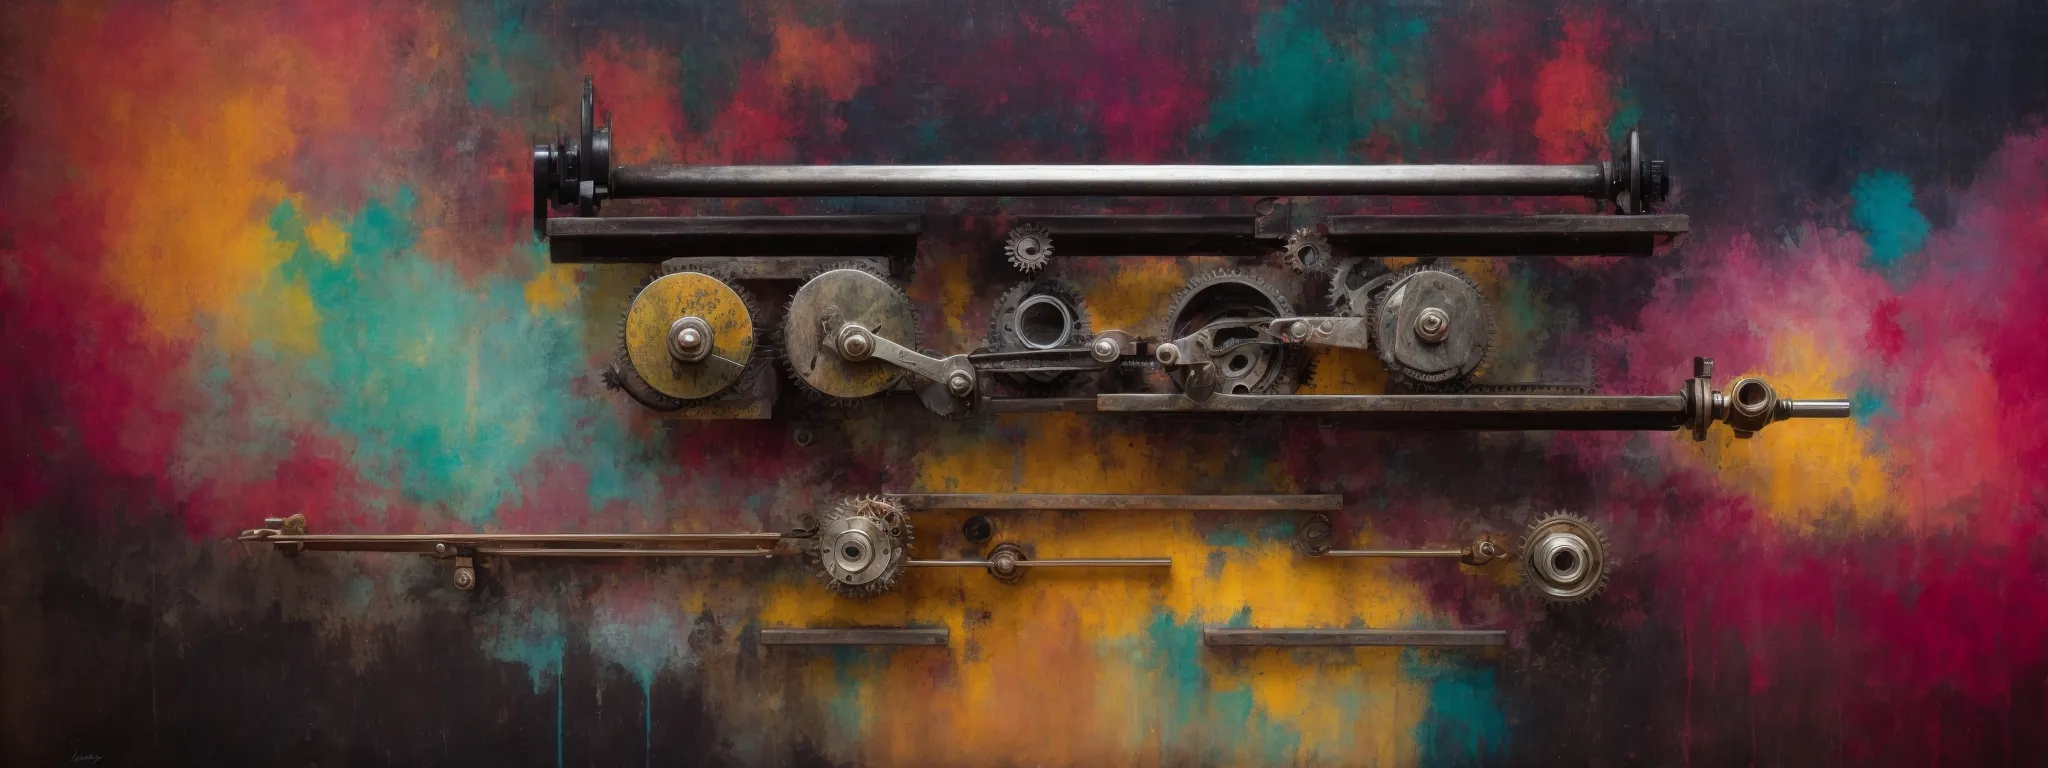 a balance scale with gears on one side and a colorful, abstract painting on the other, symbolizing the balance between technical seo and creative content.